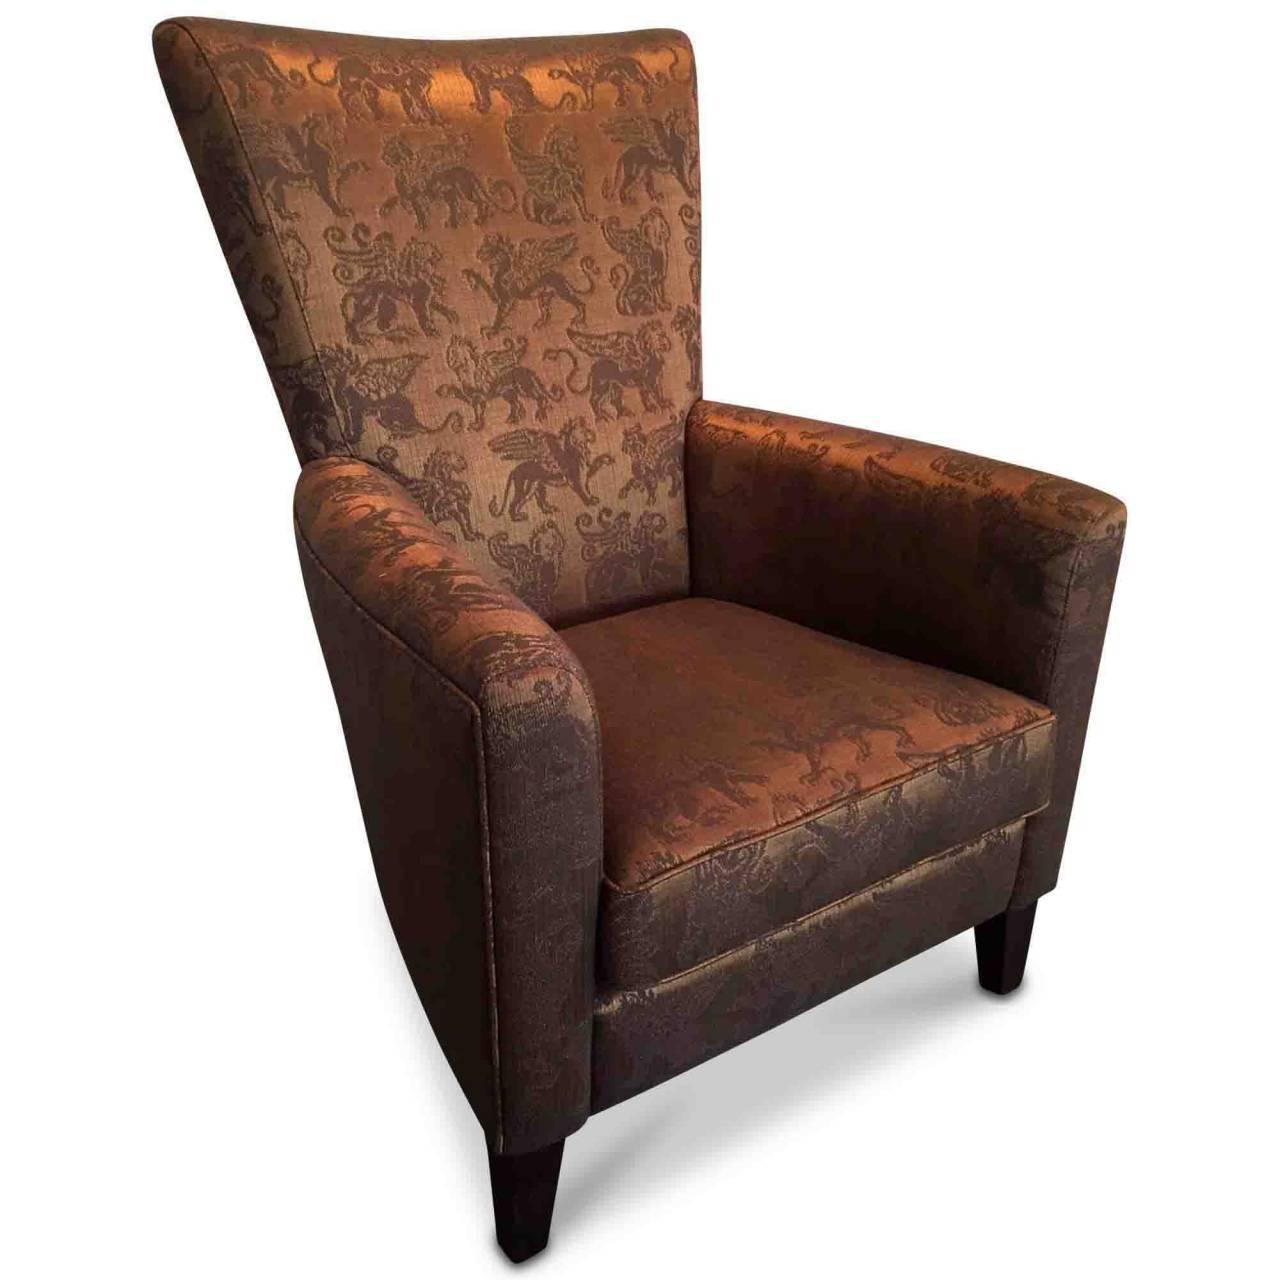 We are delighted to present to you the noble armchair "Conte" designed and manufactured by Bielefelder Werkstätten in Germany, that combines pleasant comfort with first-class materials and lordly design for our exclusive customers. The